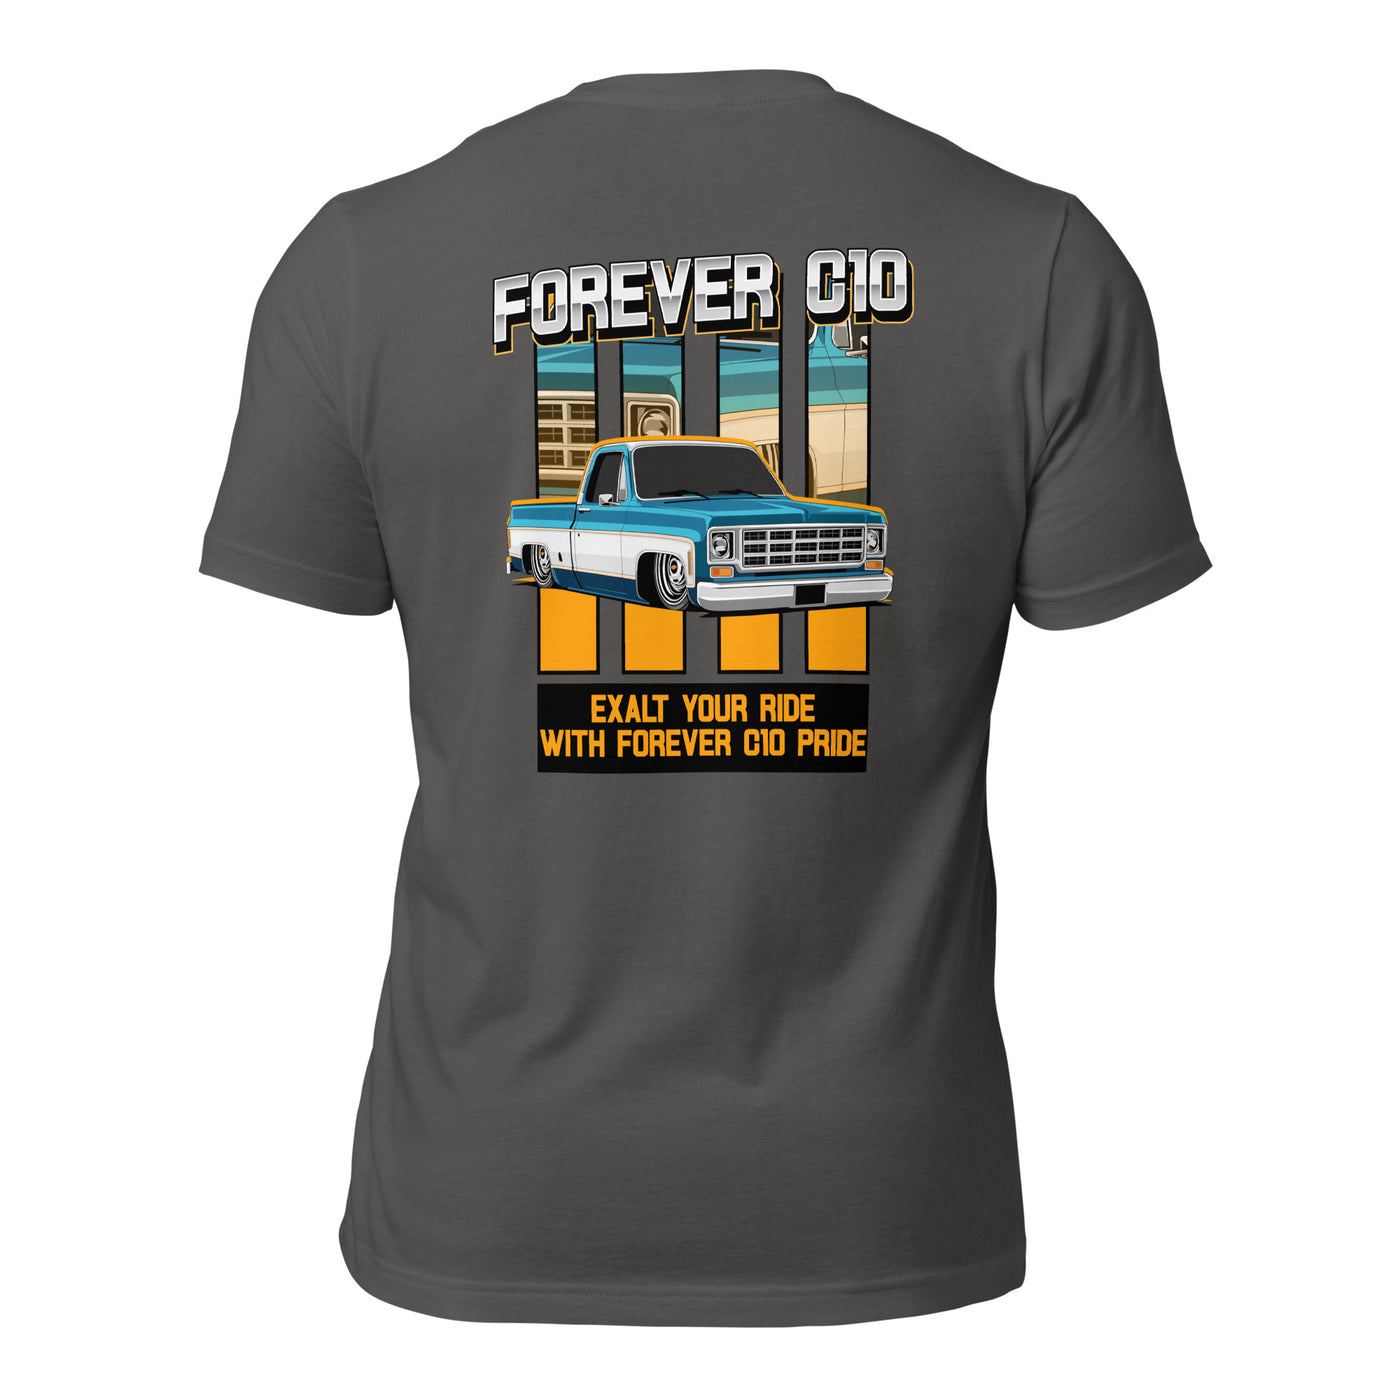 The Gen 2 Forever  Two-Toned Unisex T-shirt (Back Print); Quality Gender Neutral Apparel, Trendsetting Unisex T-Shirts, Urban Unisex Tees, Classic All-Inclusive T-Shirt